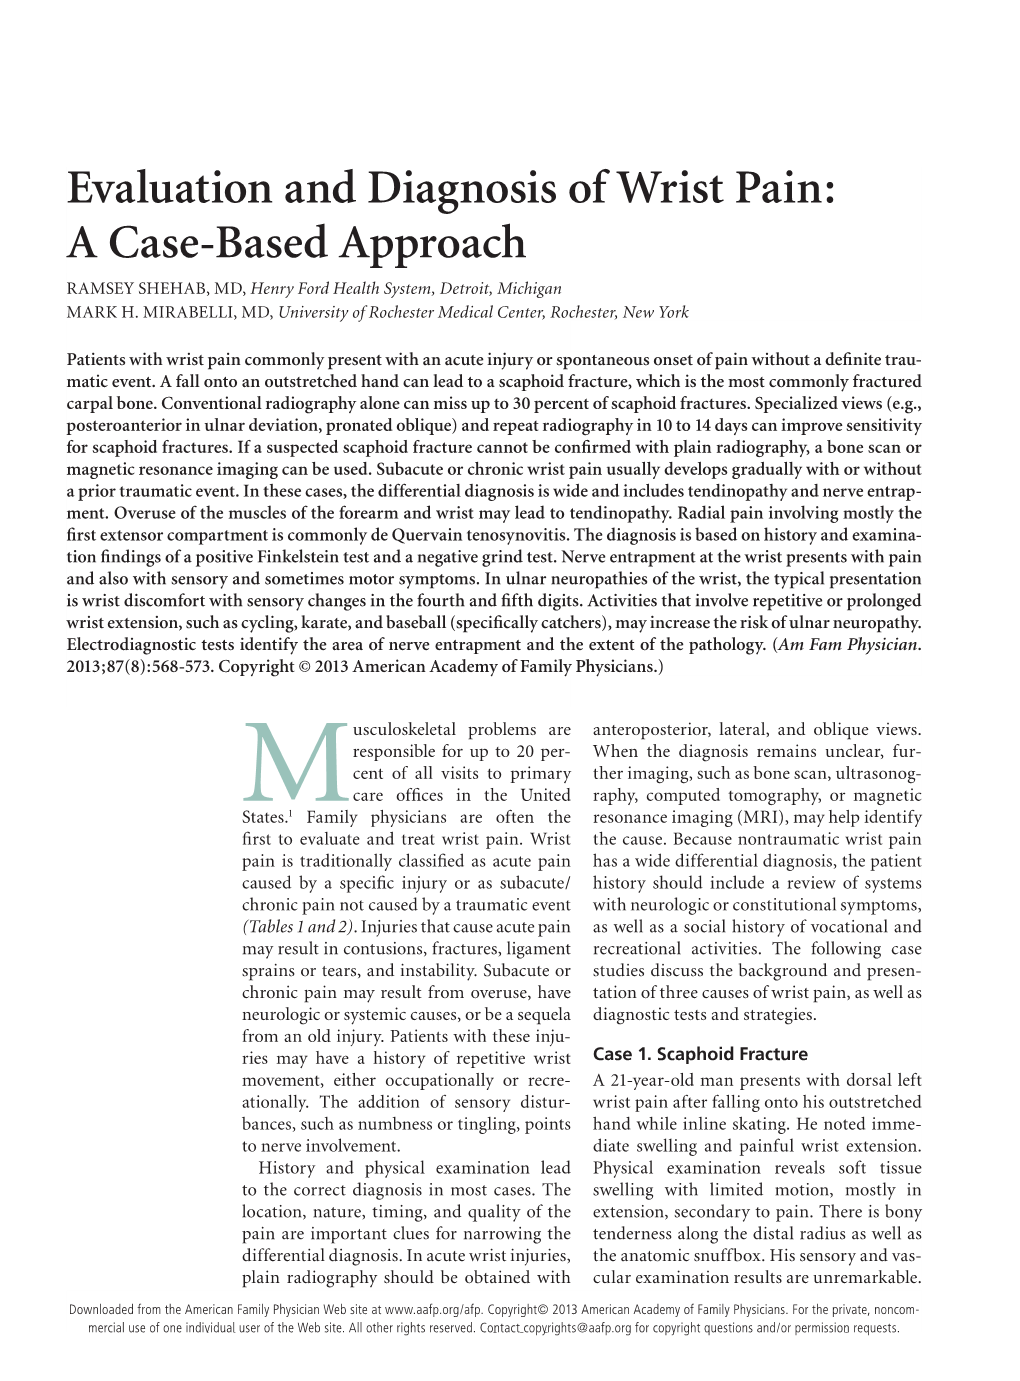 Evaluation and Diagnosis of Wrist Pain: a Case-Based Approach RAMSEY SHEHAB, MD, Henry Ford Health System, Detroit, Michigan MARK H